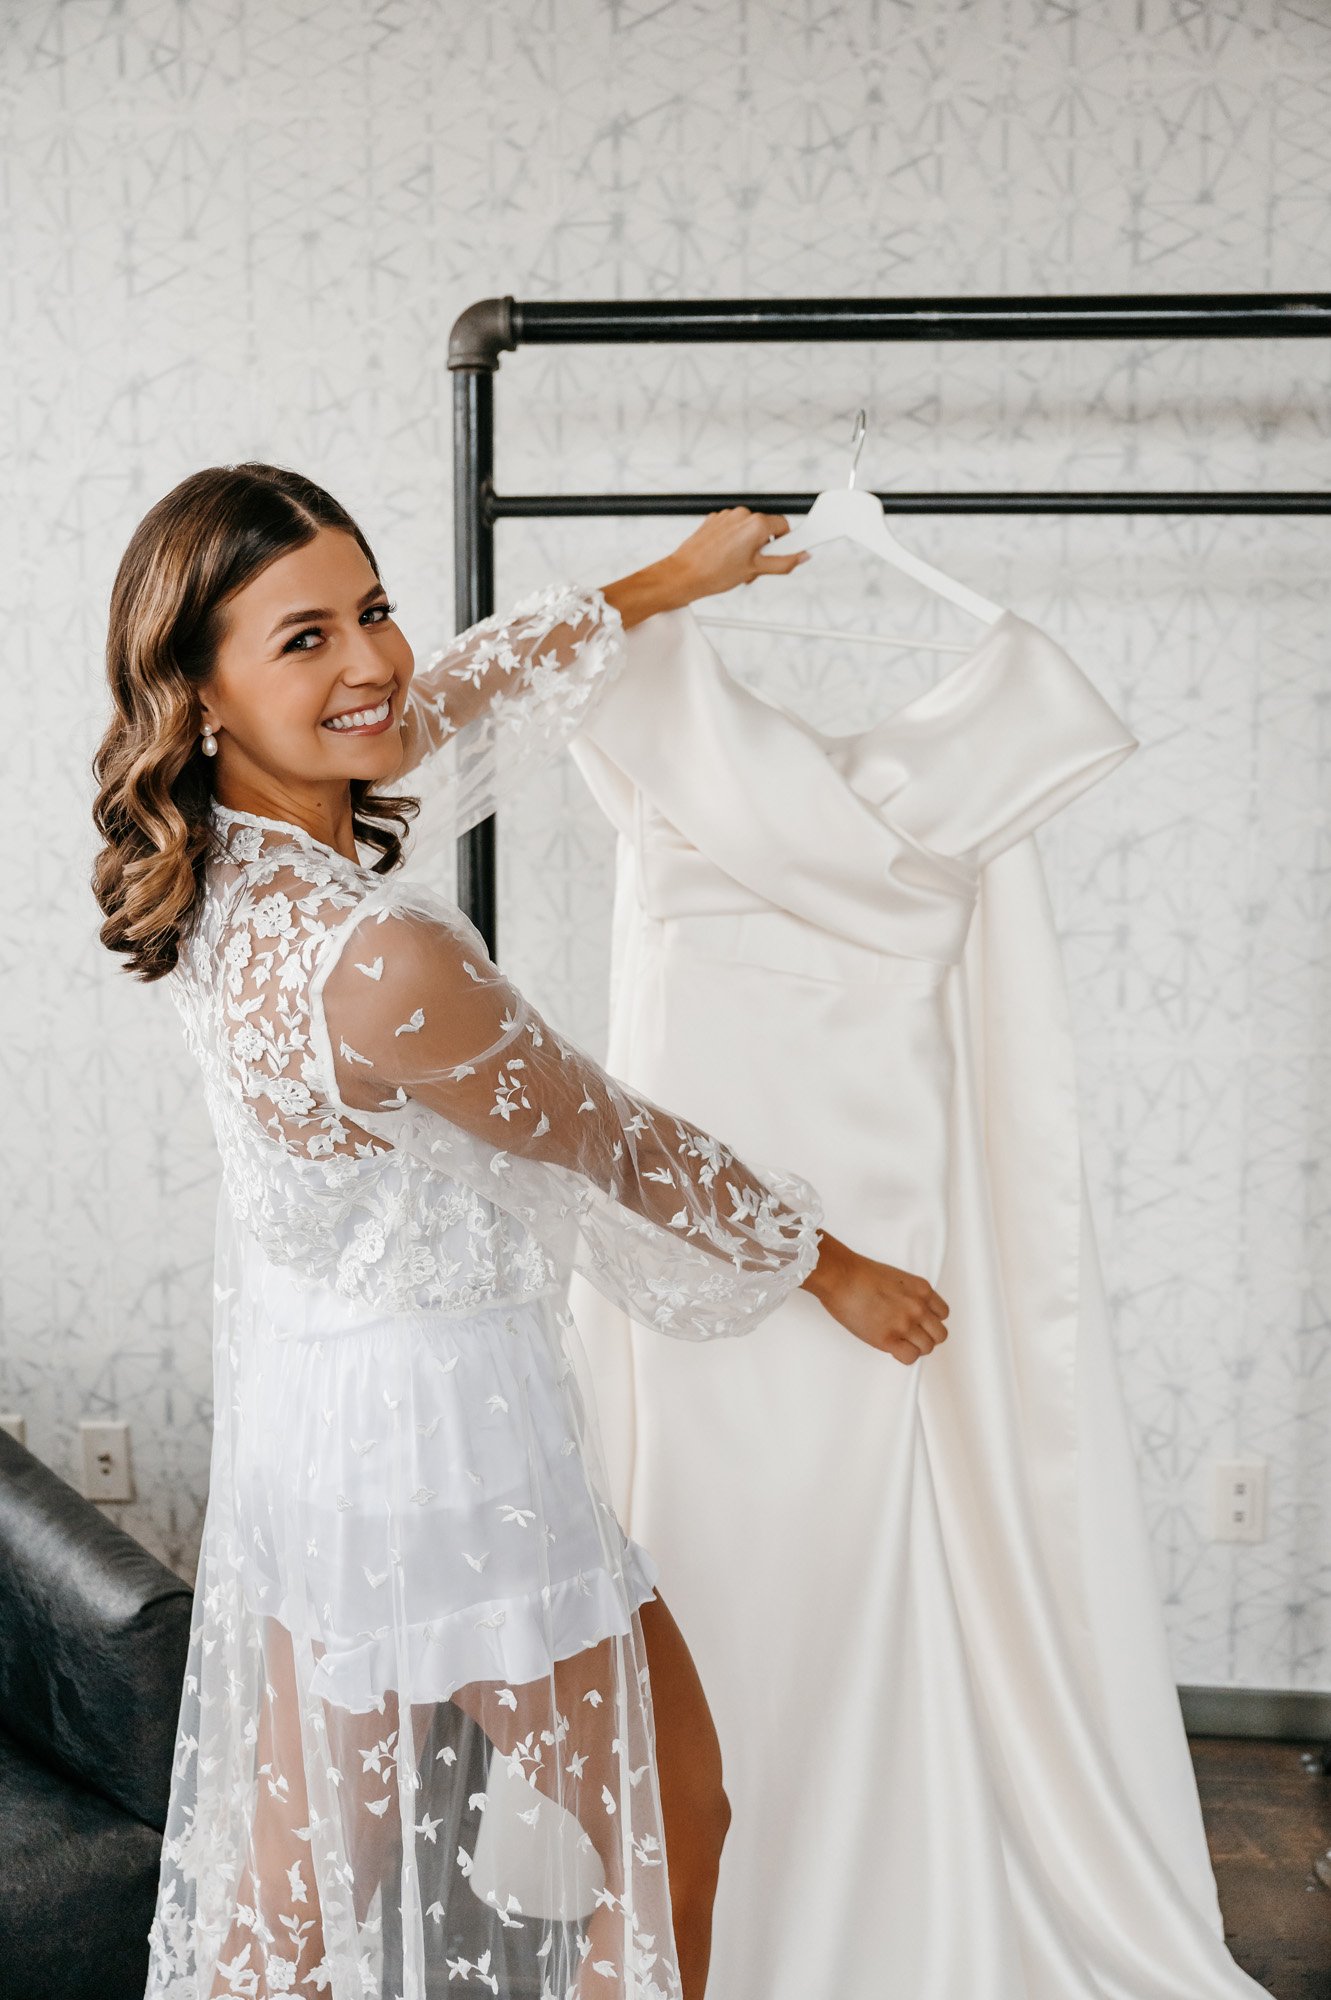 bride getting ready in a floral white lace bridal robe looking at her wedding dress hanging in a modern setting